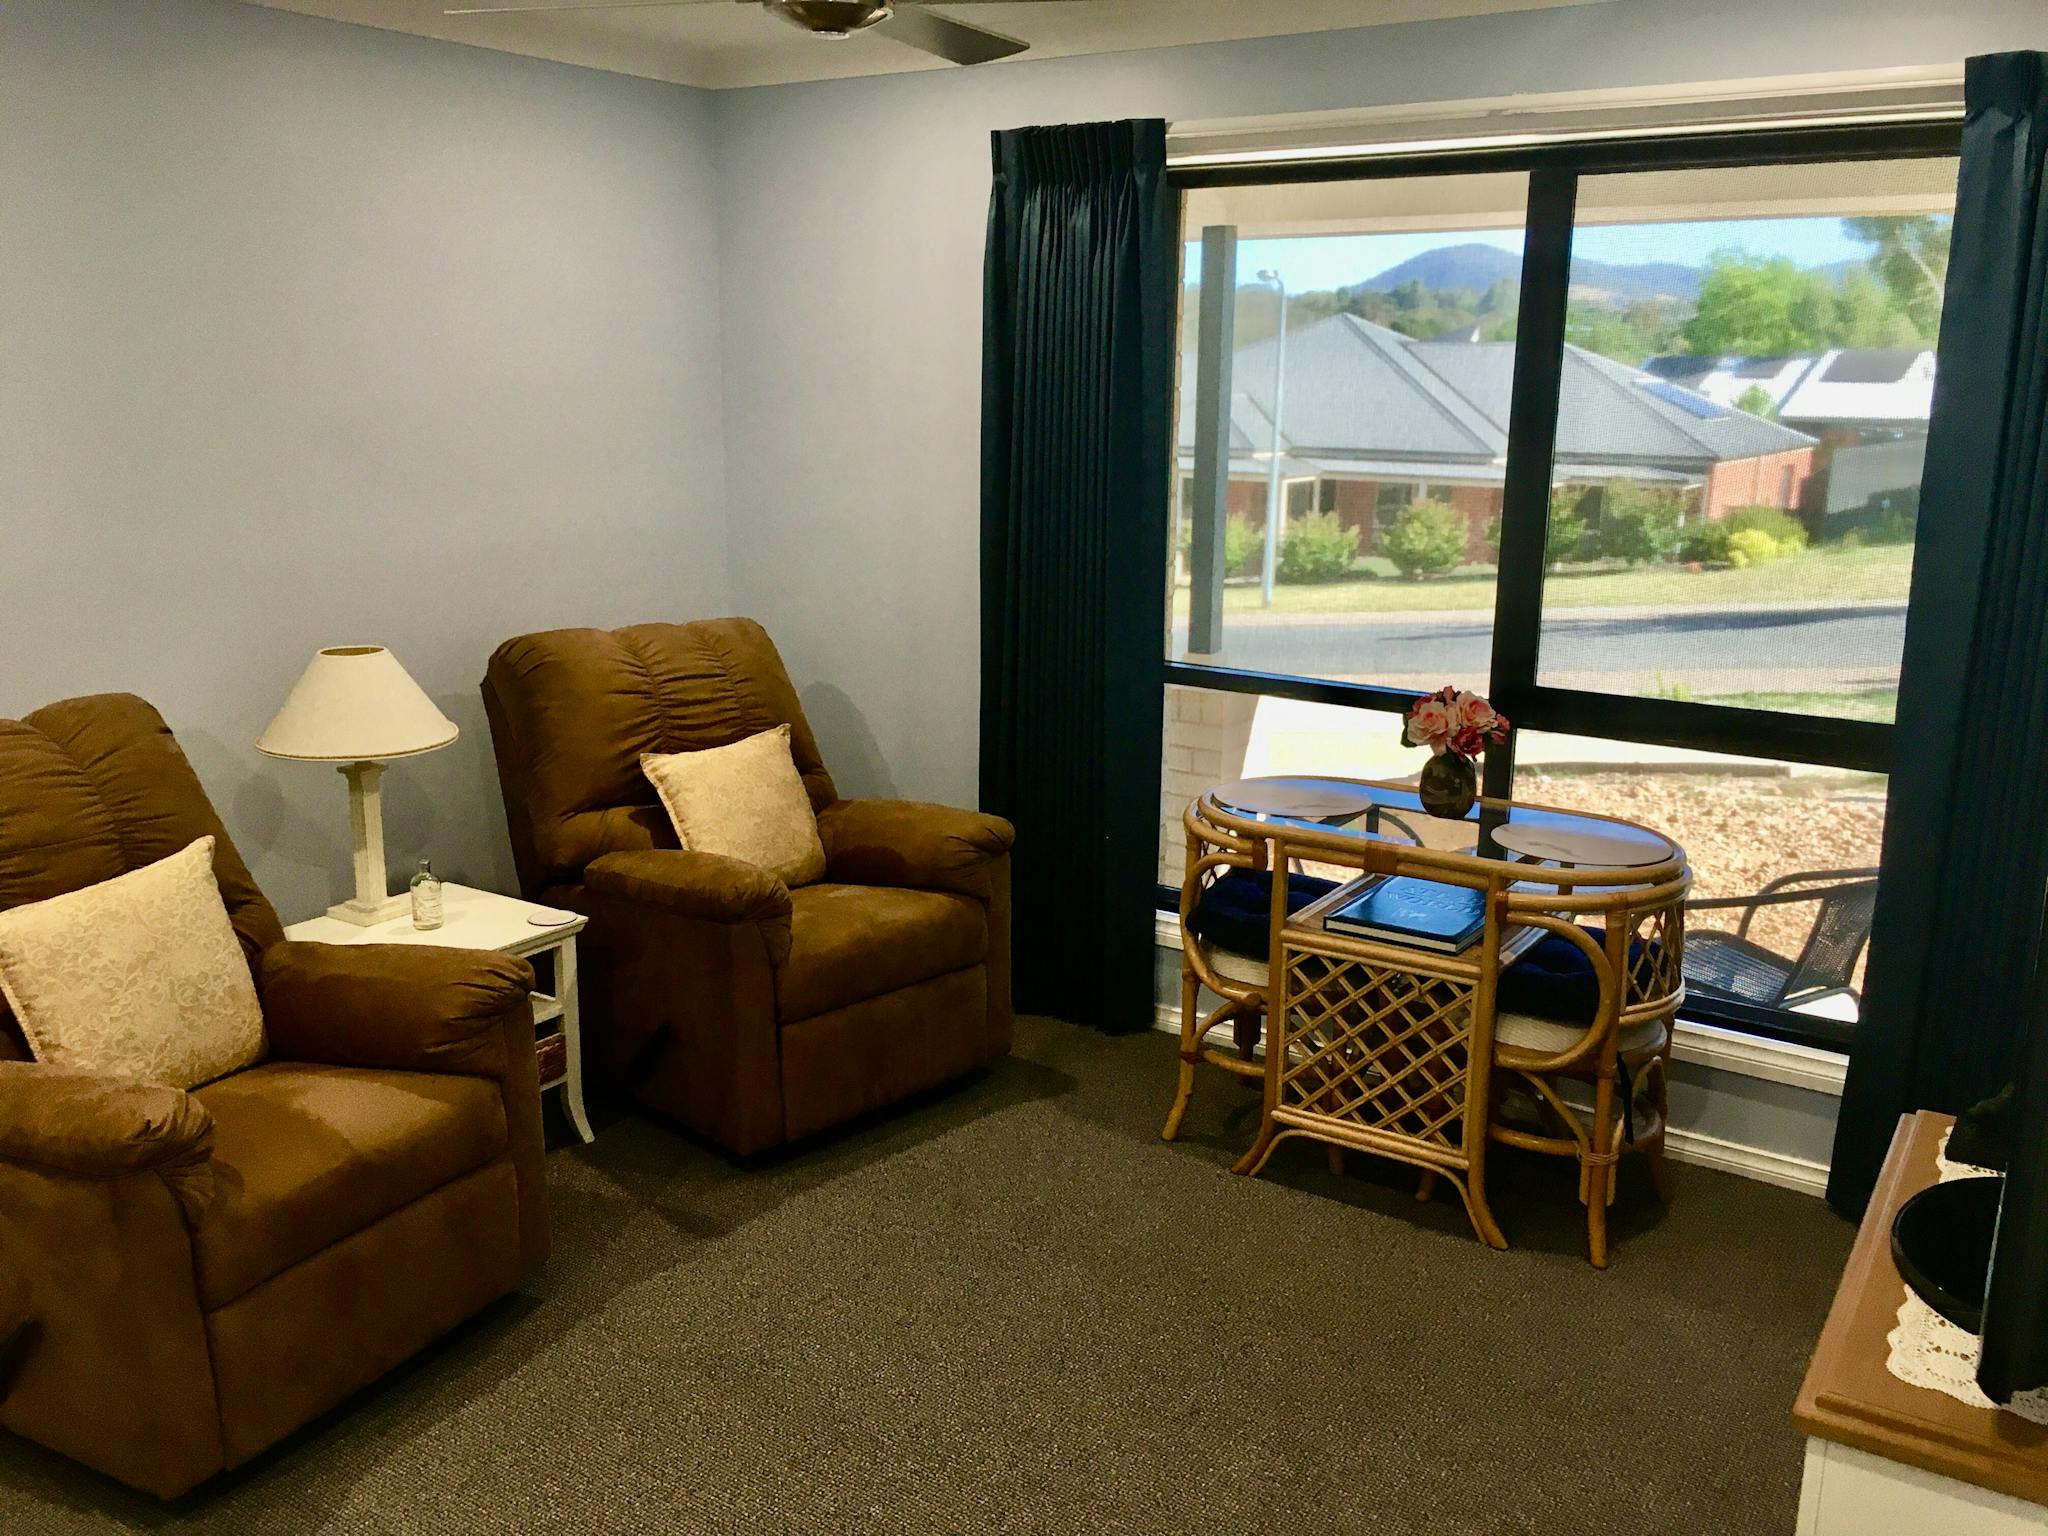 Lounge area with recliners